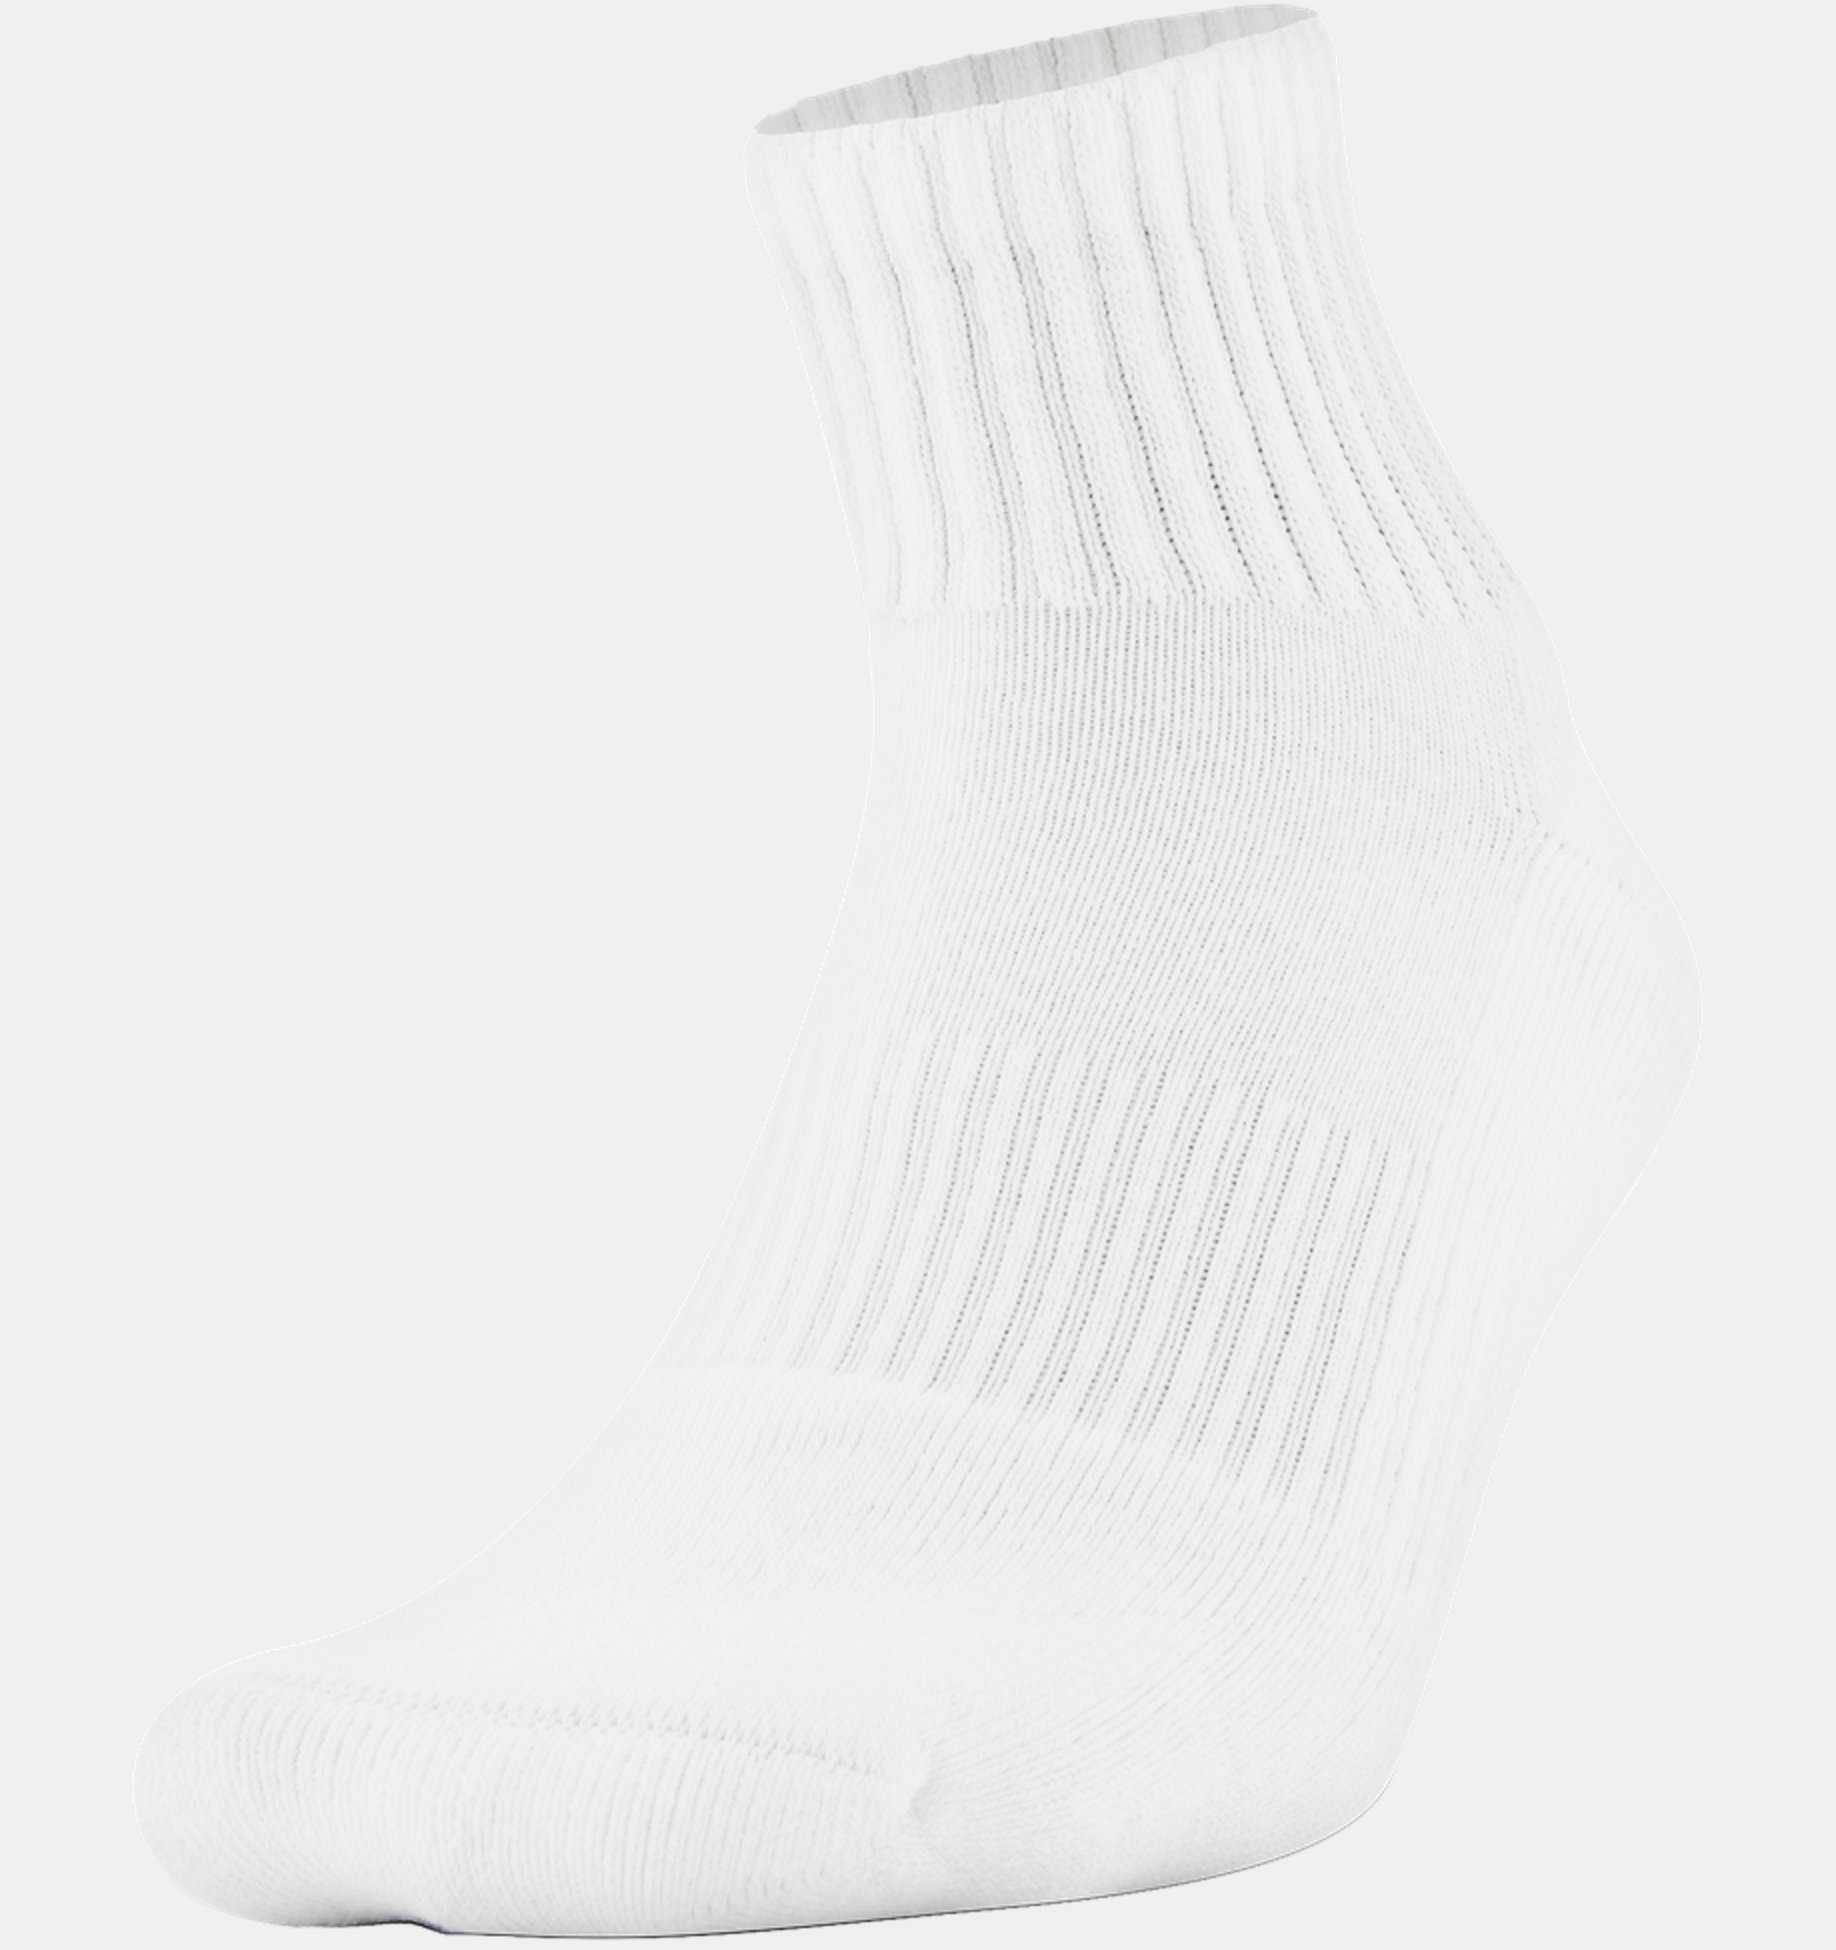 Under Armour Charged Cotton 2.0 Crew Sports Socks